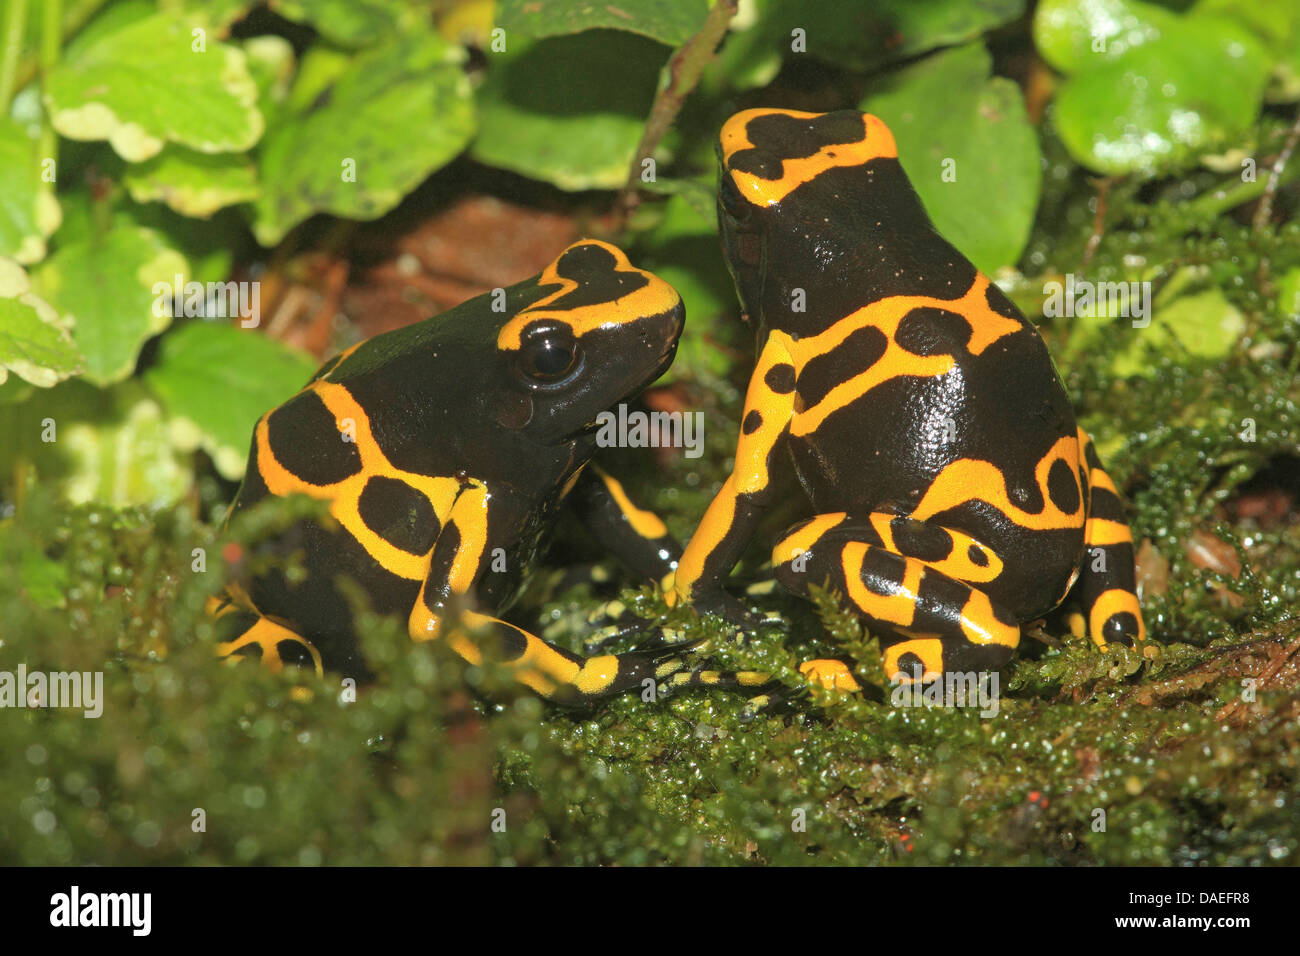 yellow-banded poison dart frog, yellow banded poison frog, bumble bee poison arrow frog (Dendrobates leucomelas), two individuals on the ground Stock Photo